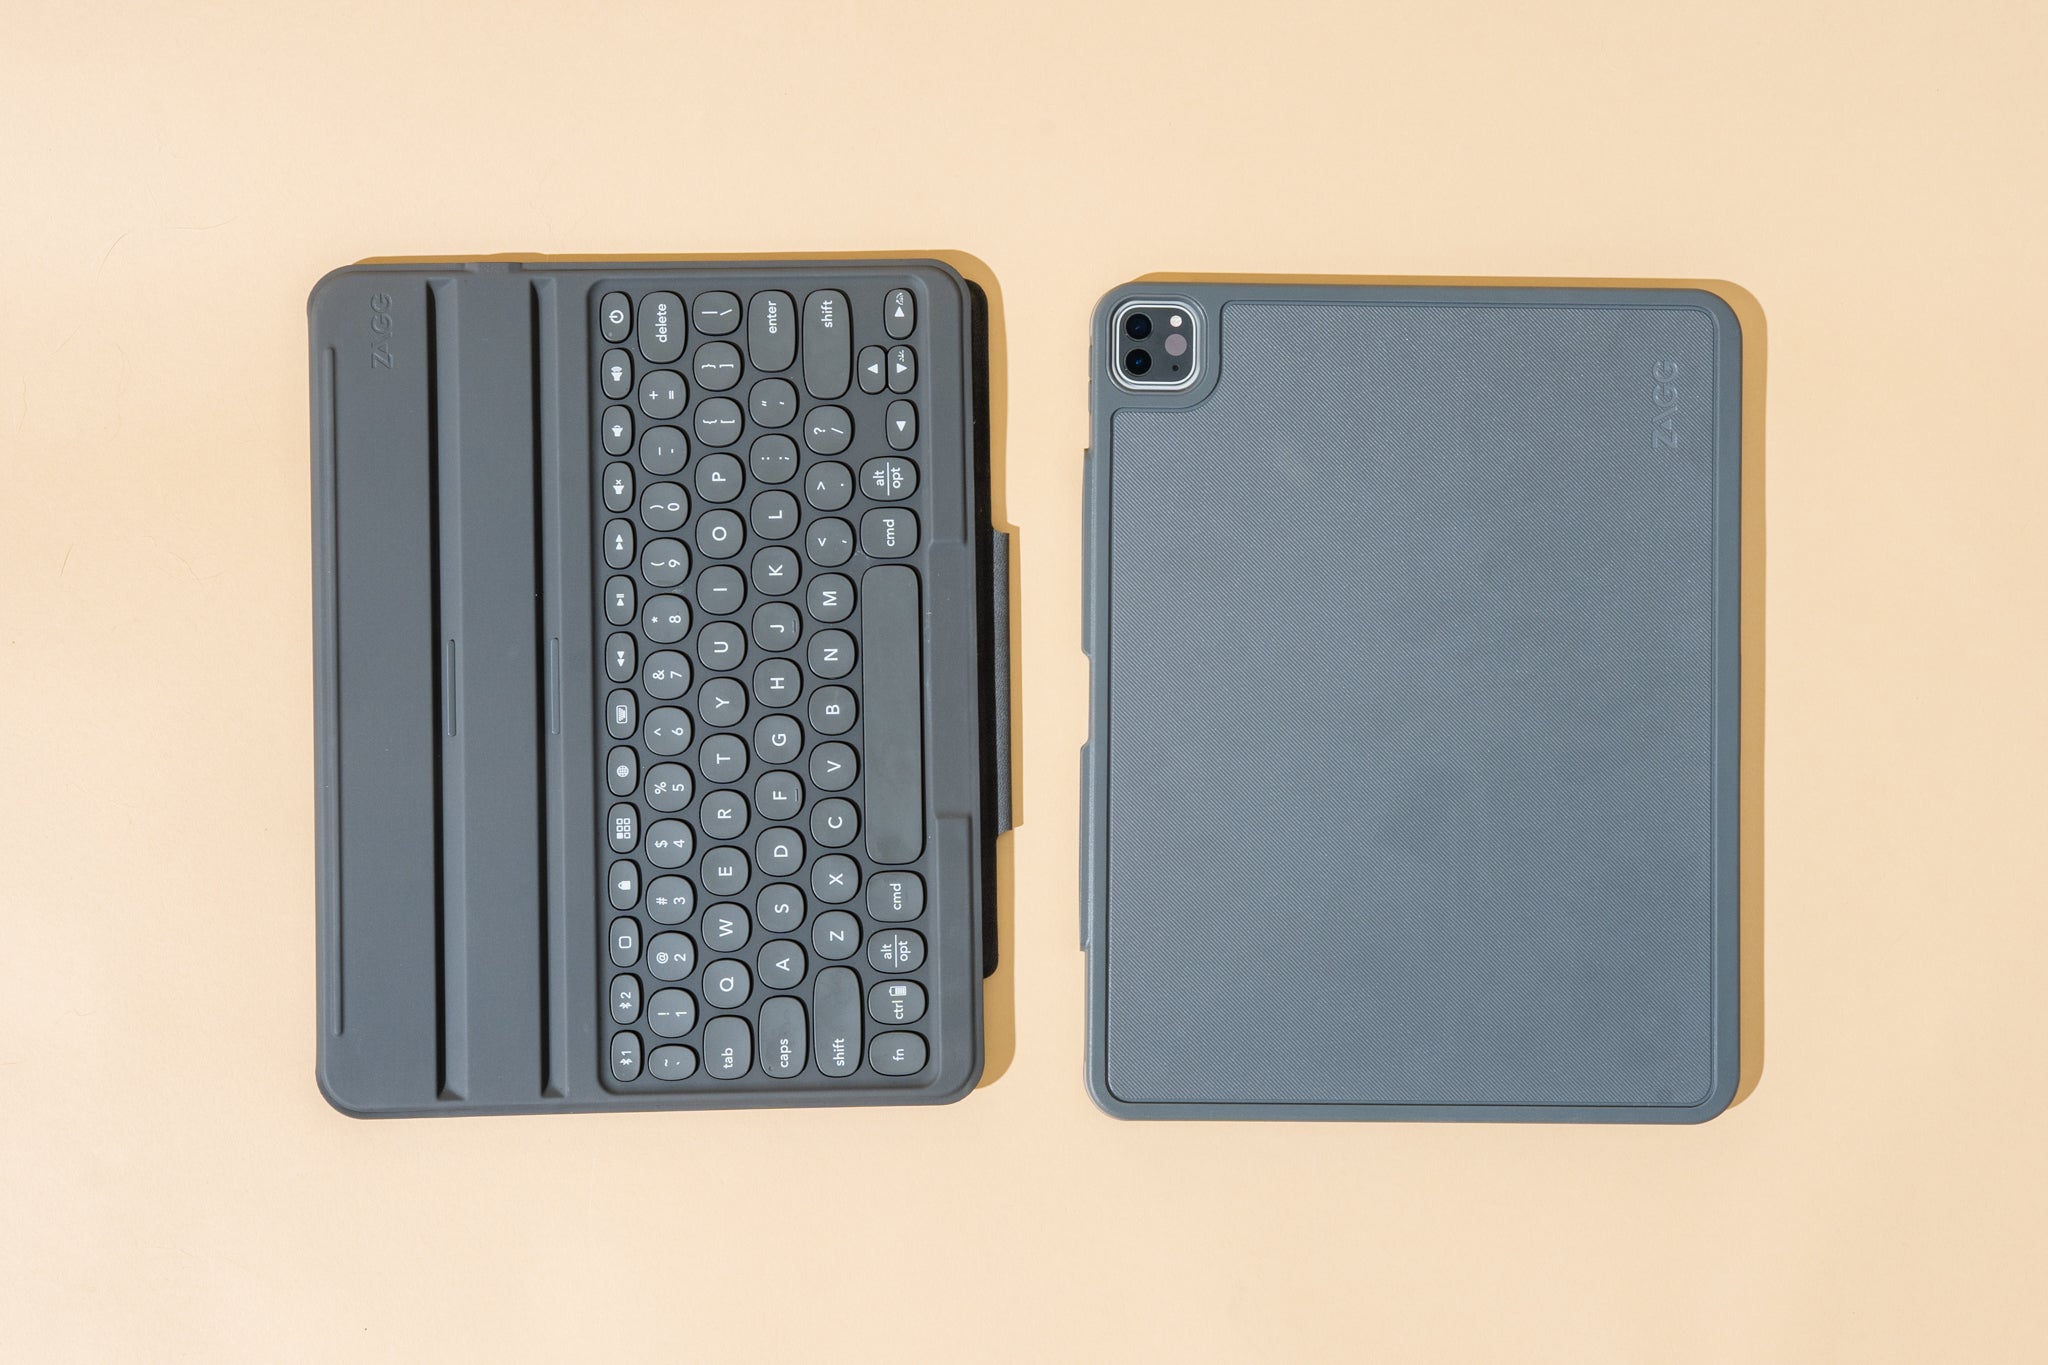 The Best iPad Pro Keyboard Cases | CellularNews